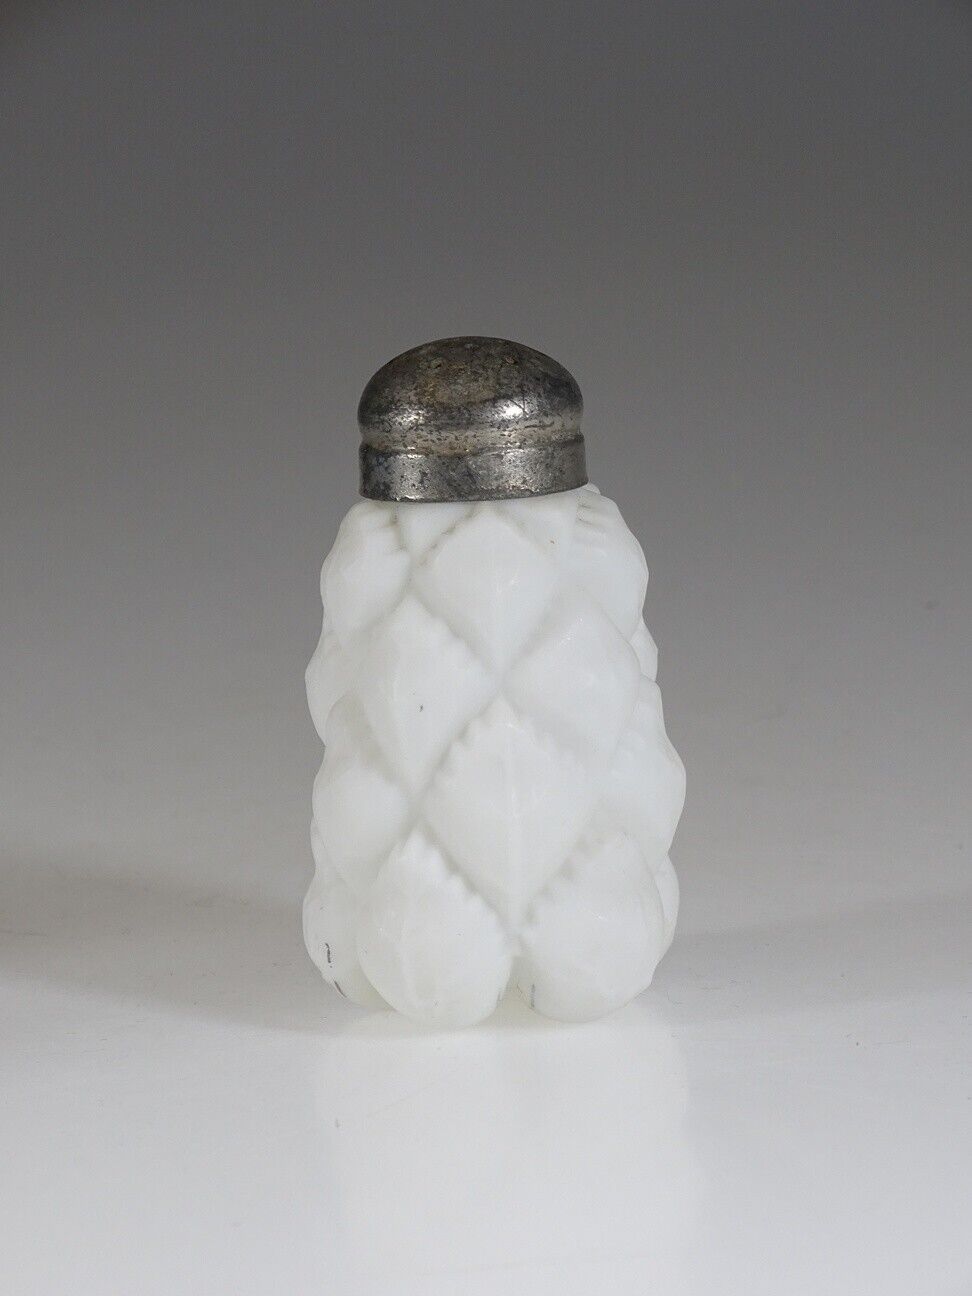 EAPG Consolidated Milk Glass Pineapple Quilted Salt Shaker c.1896